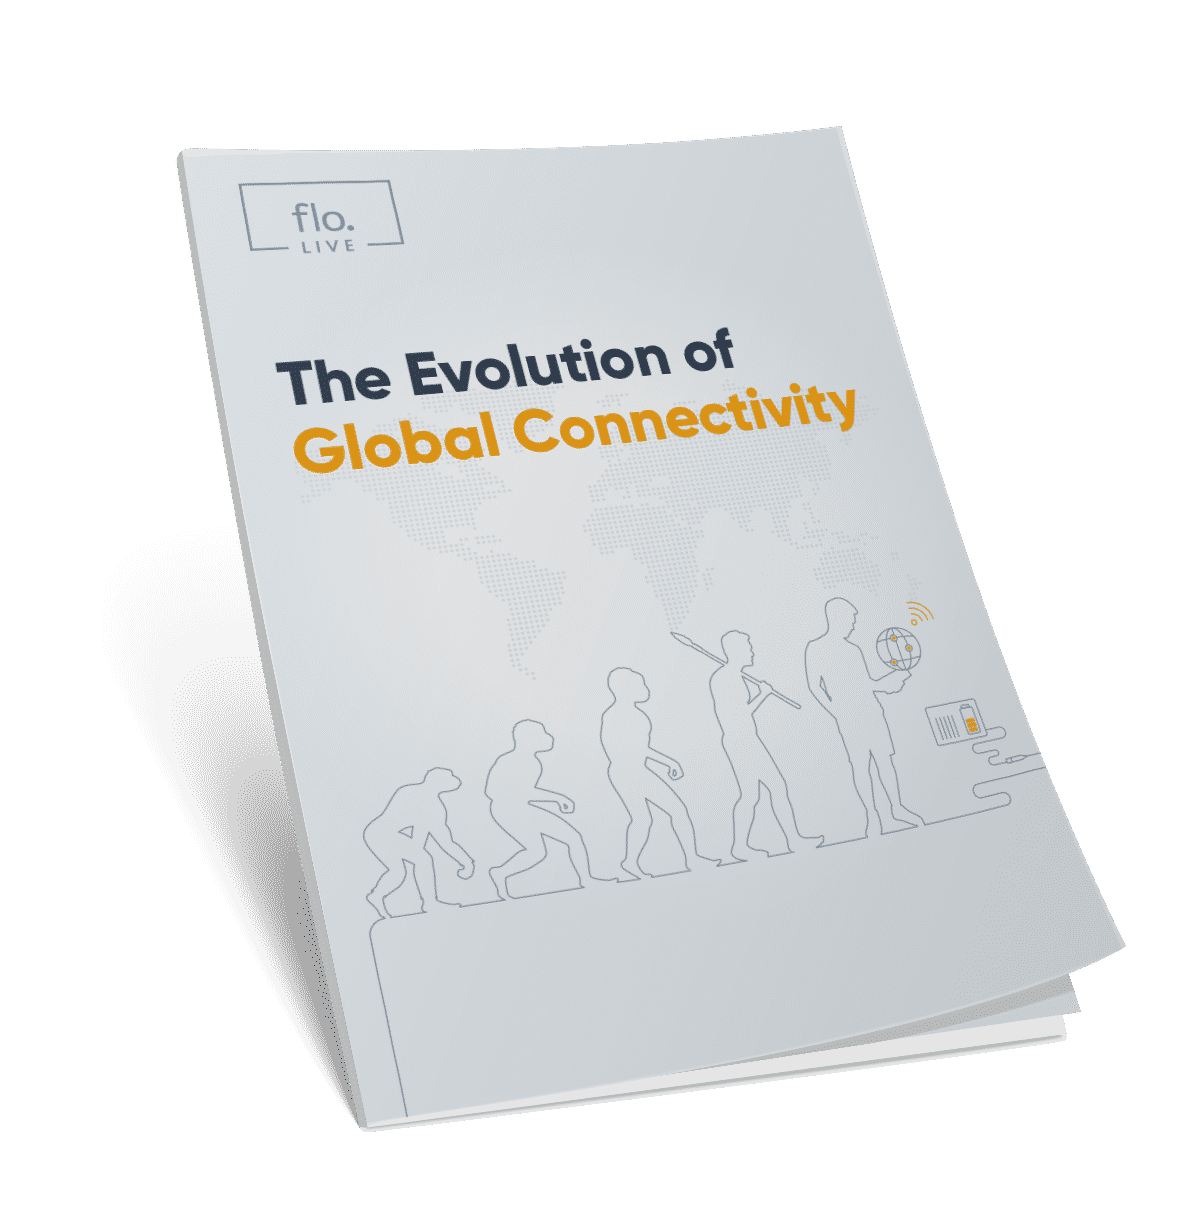 The Evolution of Global Connectivity image